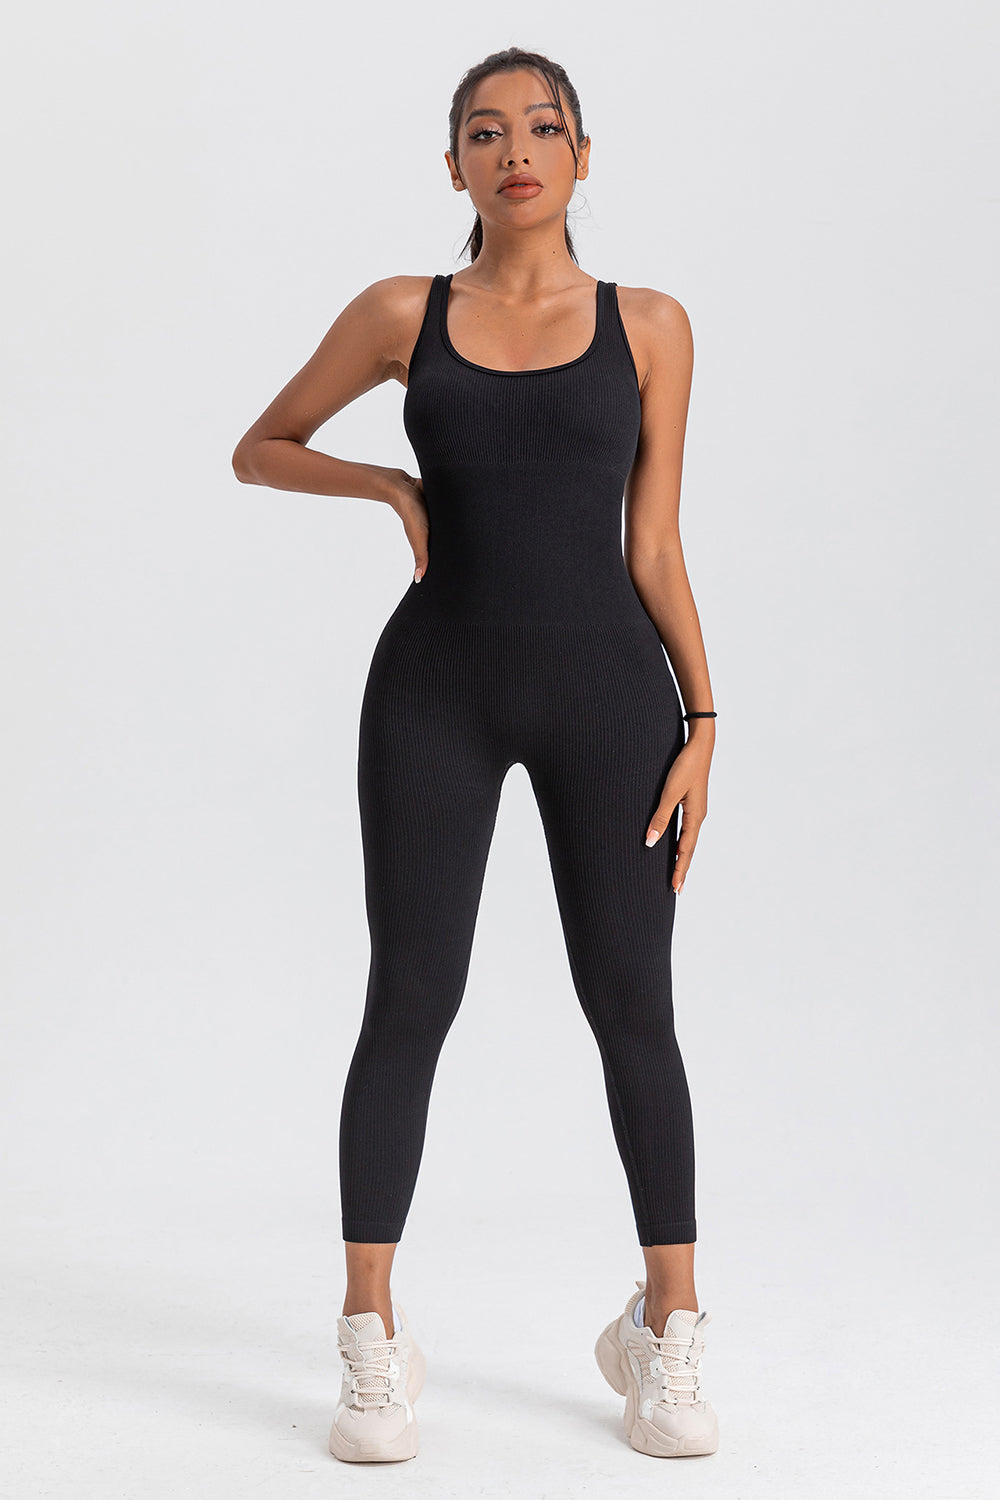 Wide Strap Sleeveless Active Jumpsuit Sunset and Swim Black S 